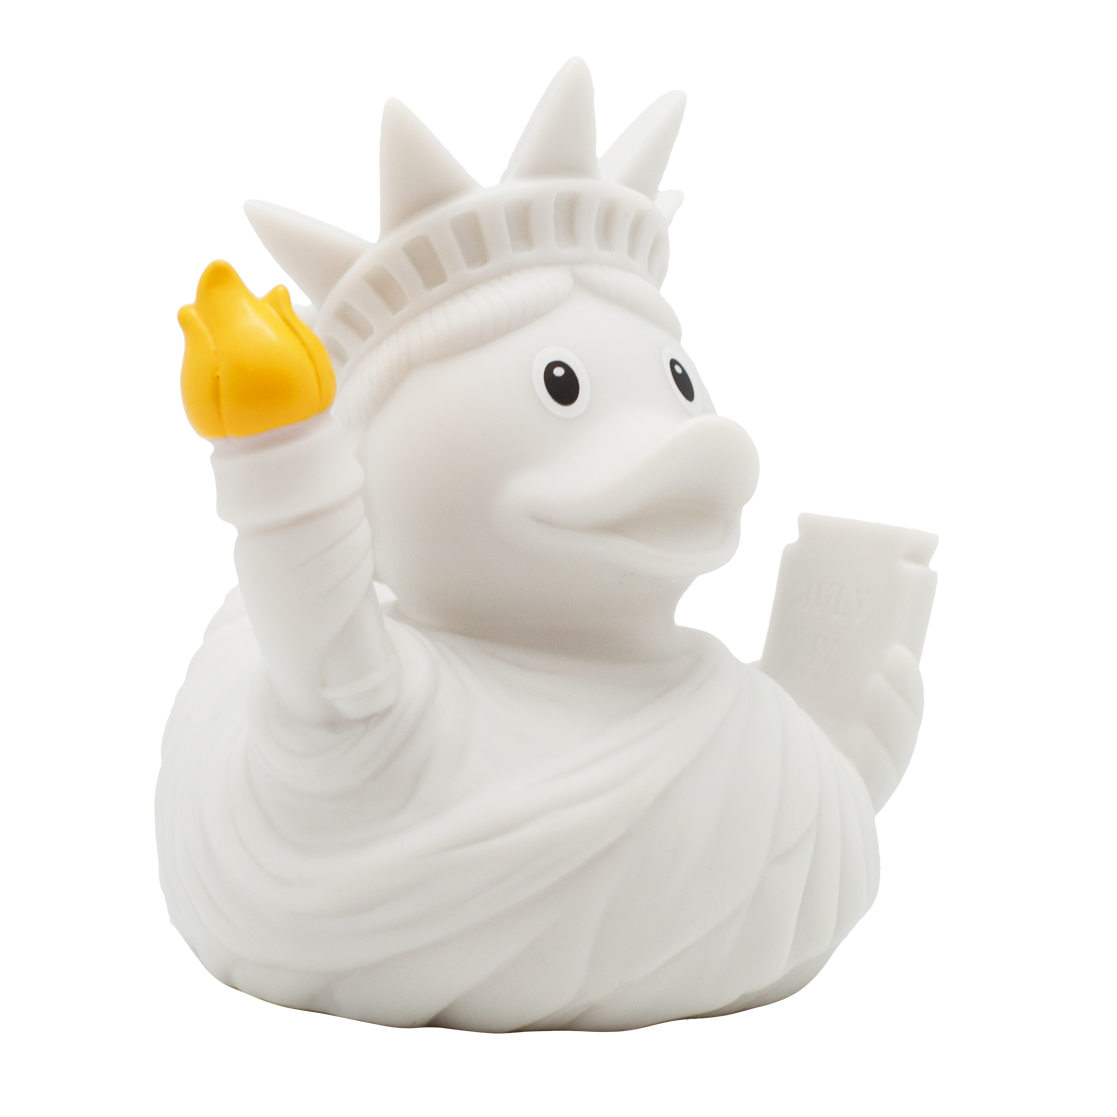 Duck Statue of White Freedom